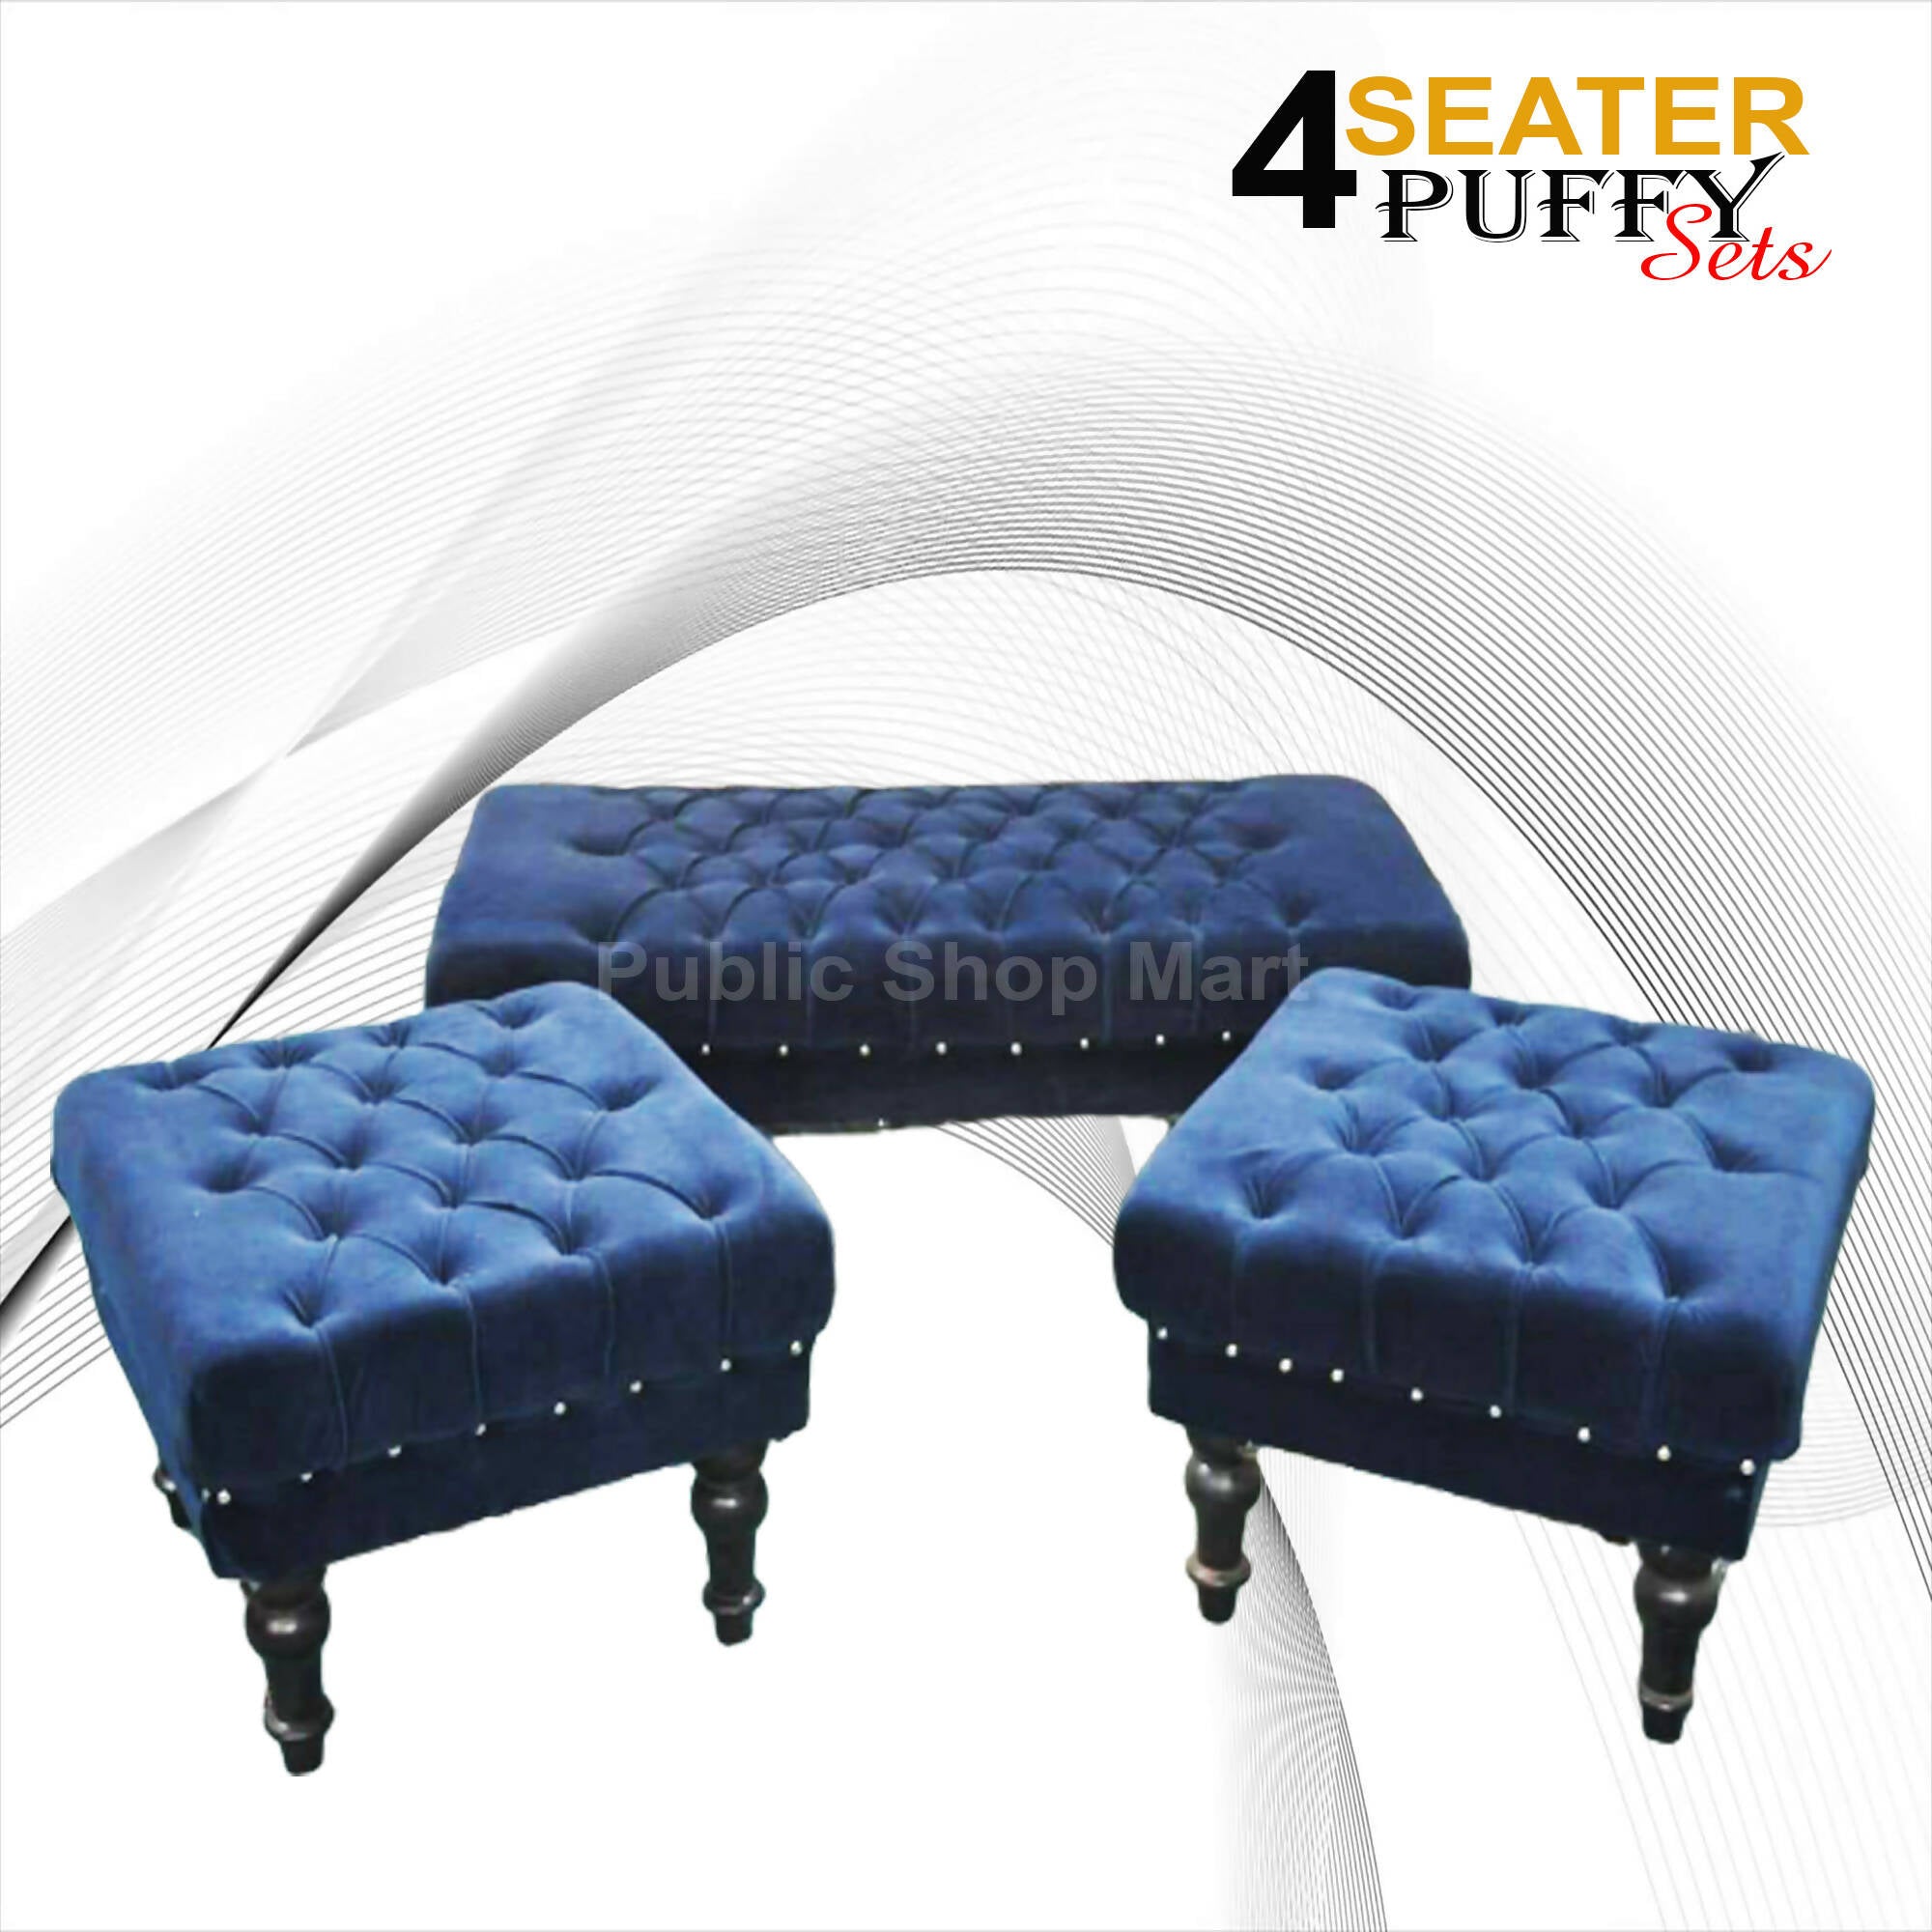 Custumize Sofa 4 Seater Puffy Sets Fabric Blue Valvid (Size 2 unit single seat 22x22 inches and 1 unit large 2 seater 44x22 complete set height 17